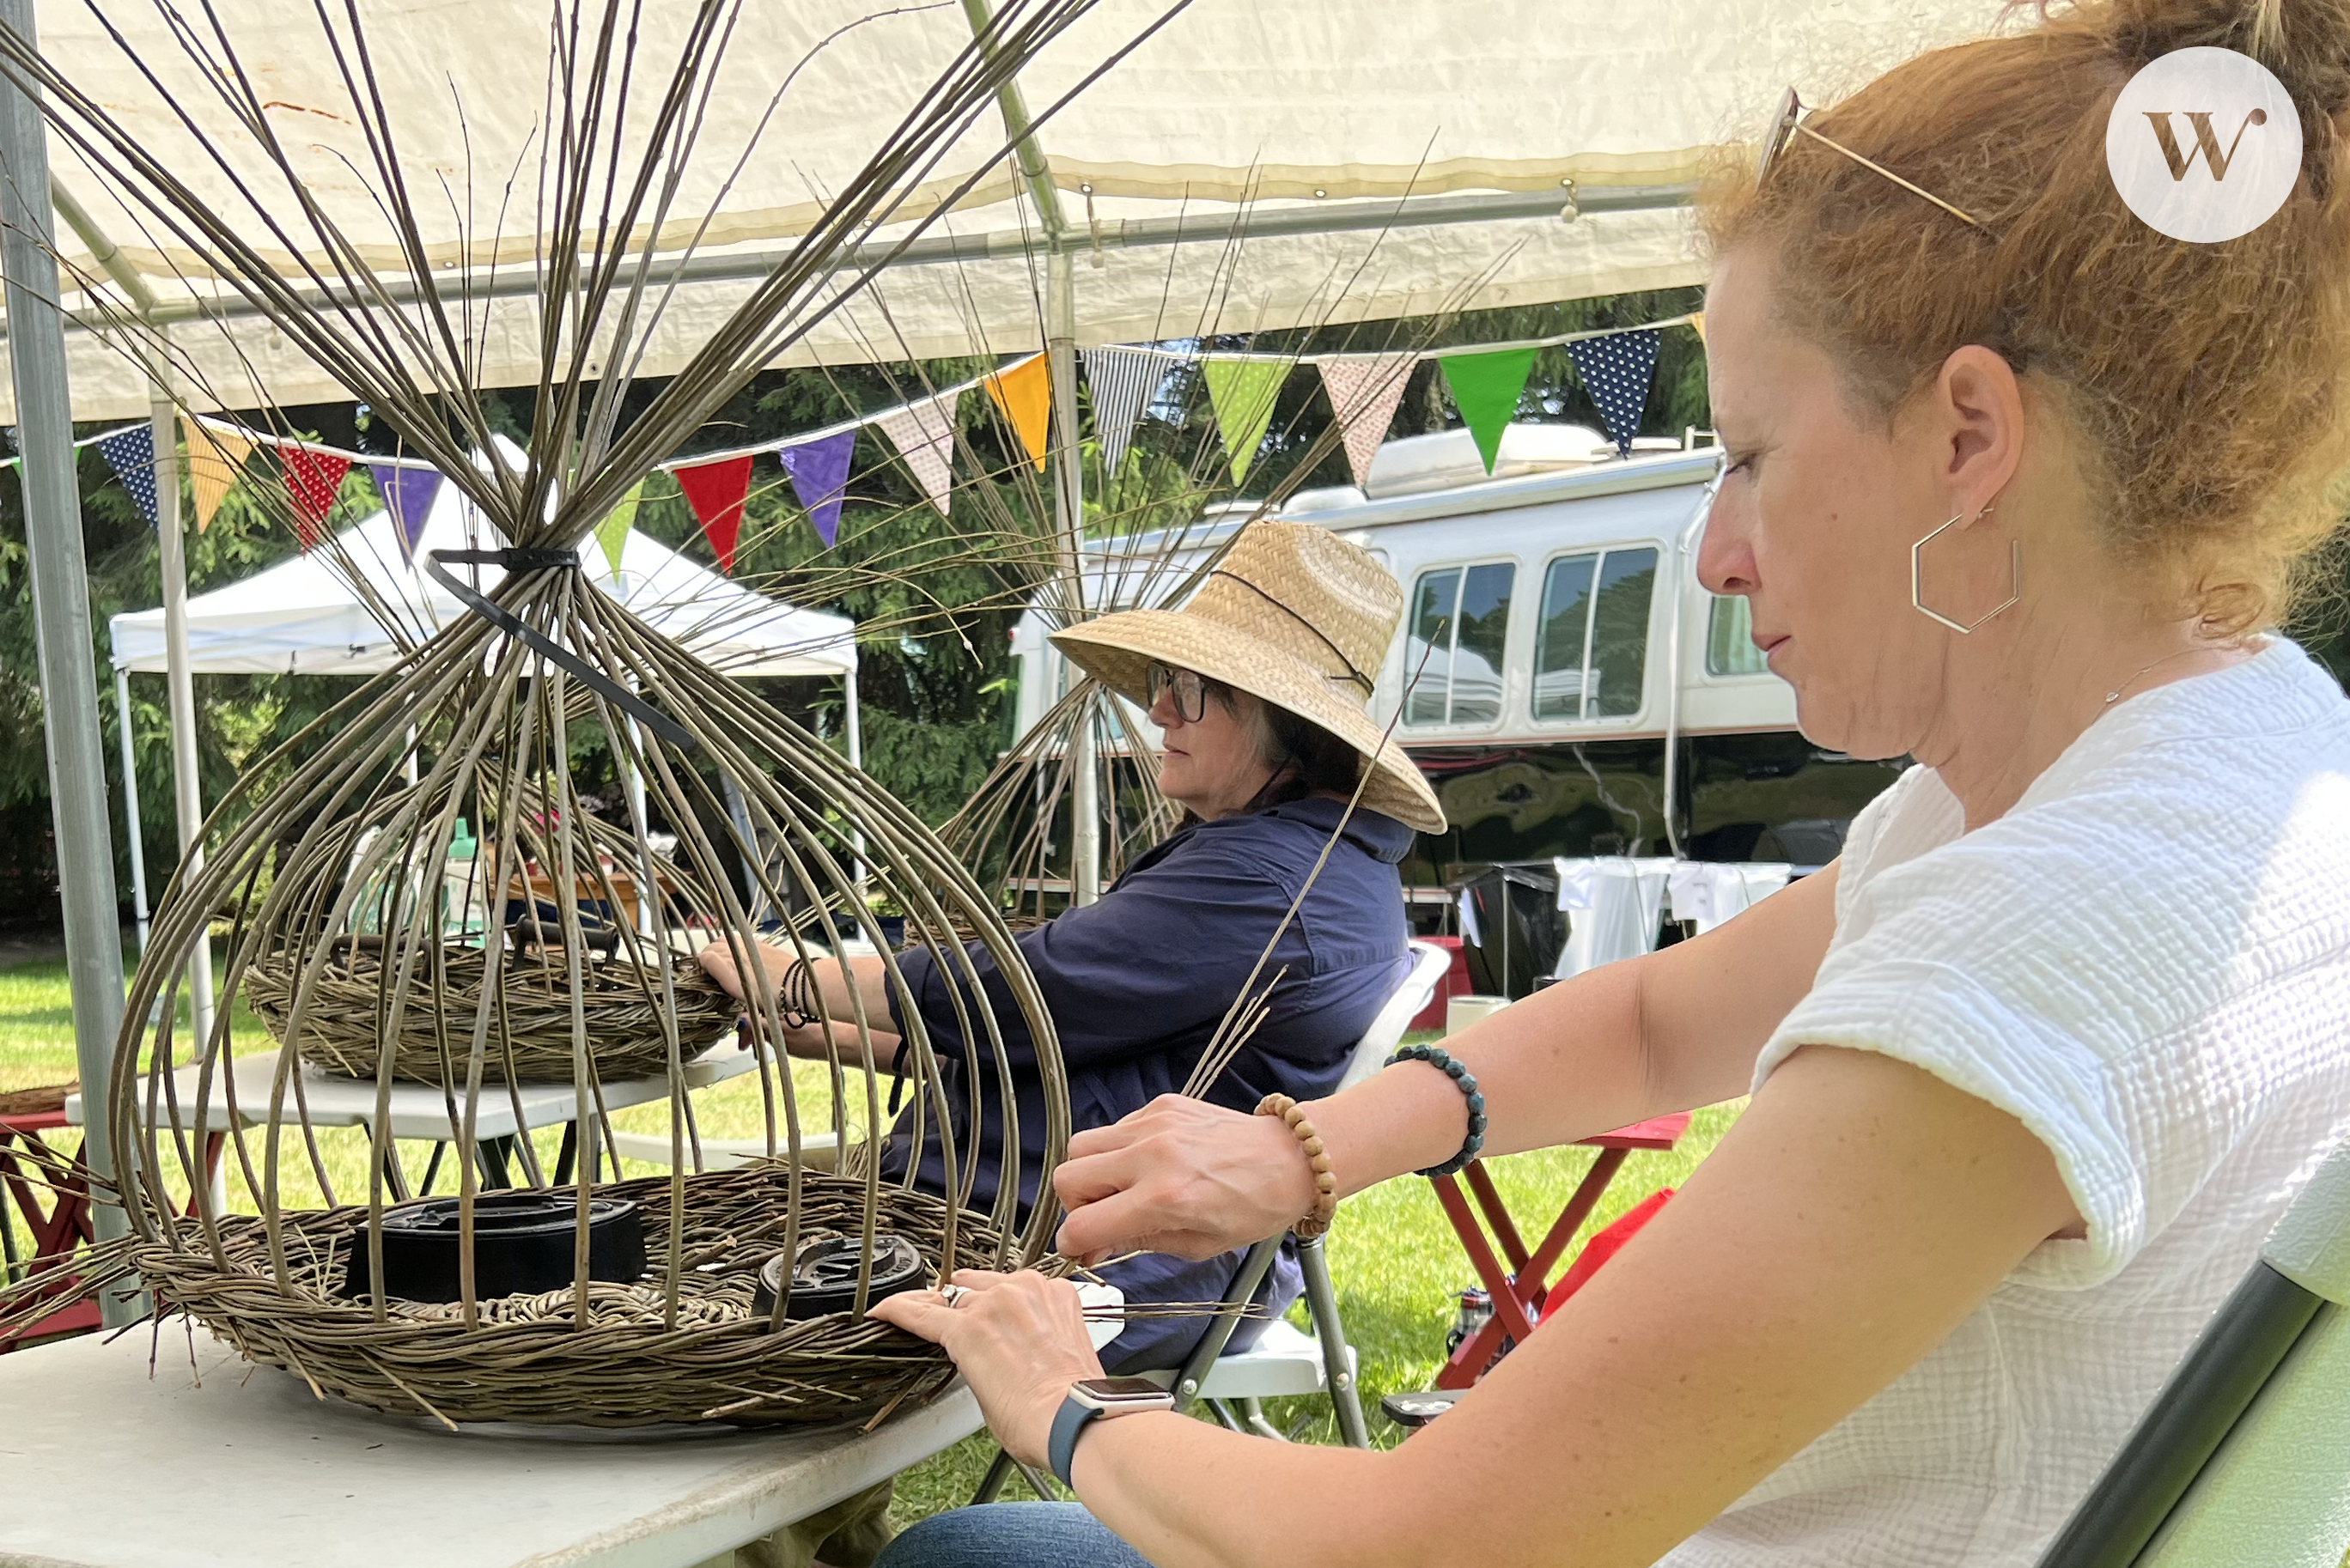 A photograph of some willow weaving class participants. They are focused on creating various sculptures and bowls or baskets.